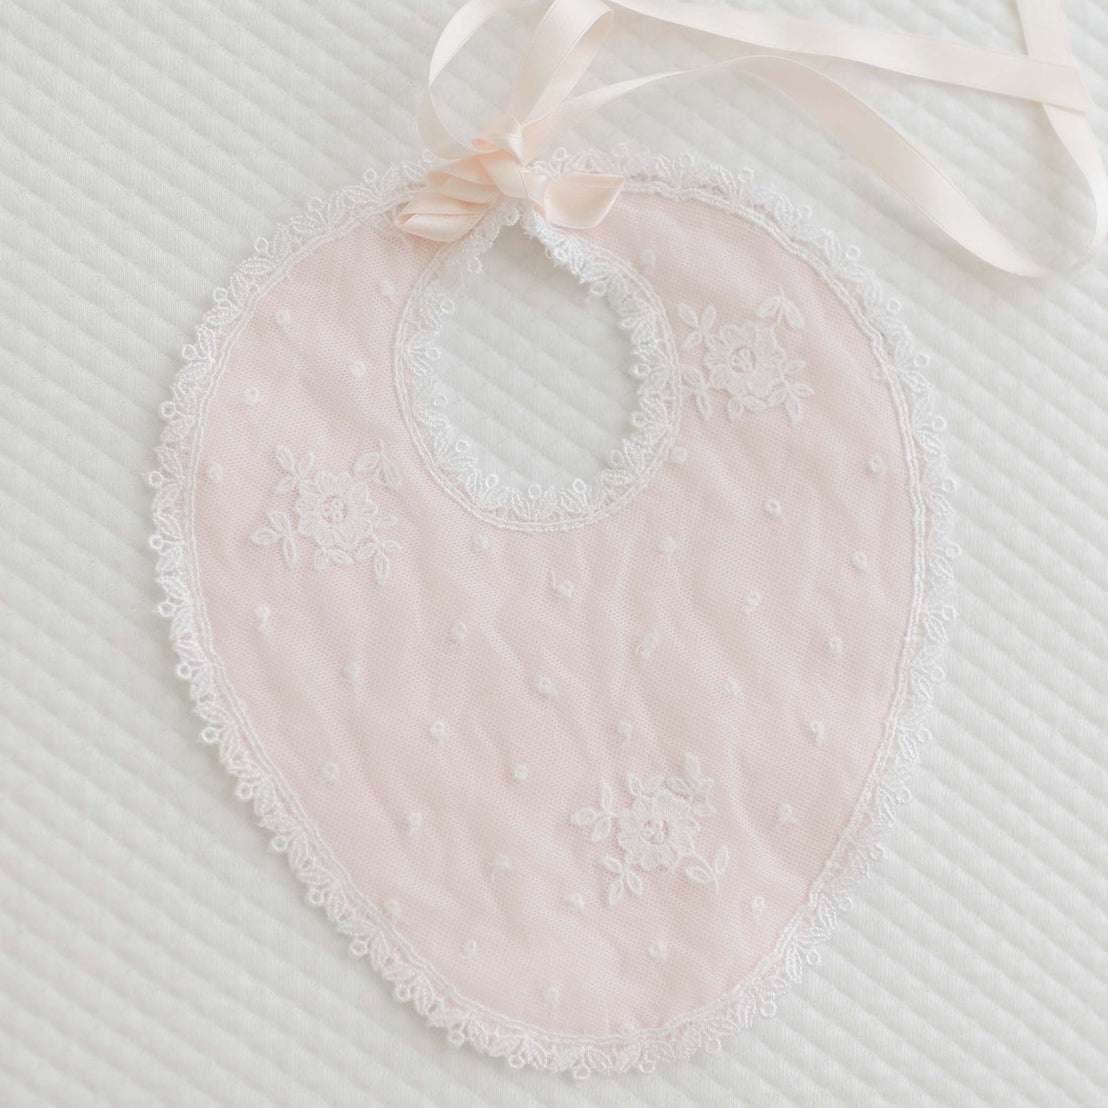 The Melissa Christening Bib is a handmade pink quilted cotton baby bib, showcasing delicate white flower patterns with intricate Venice lace trim and floral embroidery on a white textured surface. This oval-shaped bib features a ribbon tie at the top and is lovingly crafted in the USA.